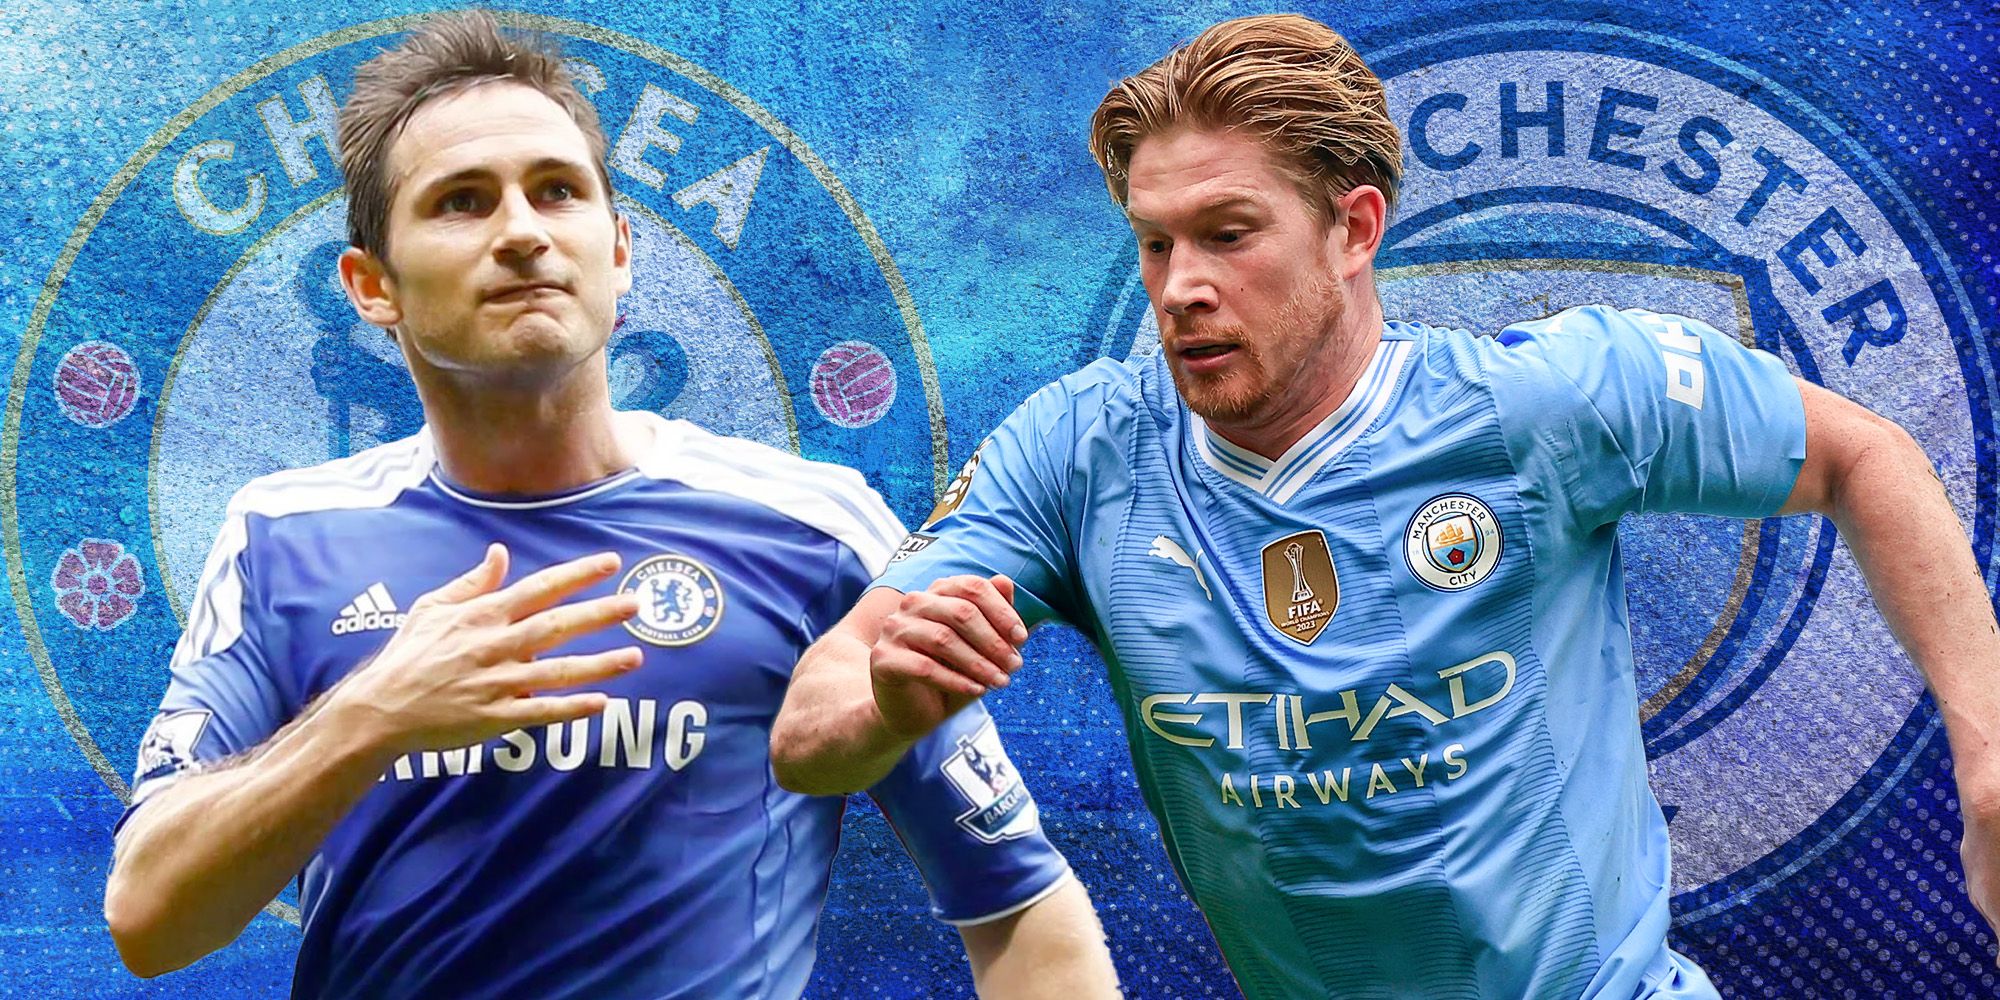 Chelsea's Frank Lampard and Manchester City's Kevin De Bruyne.